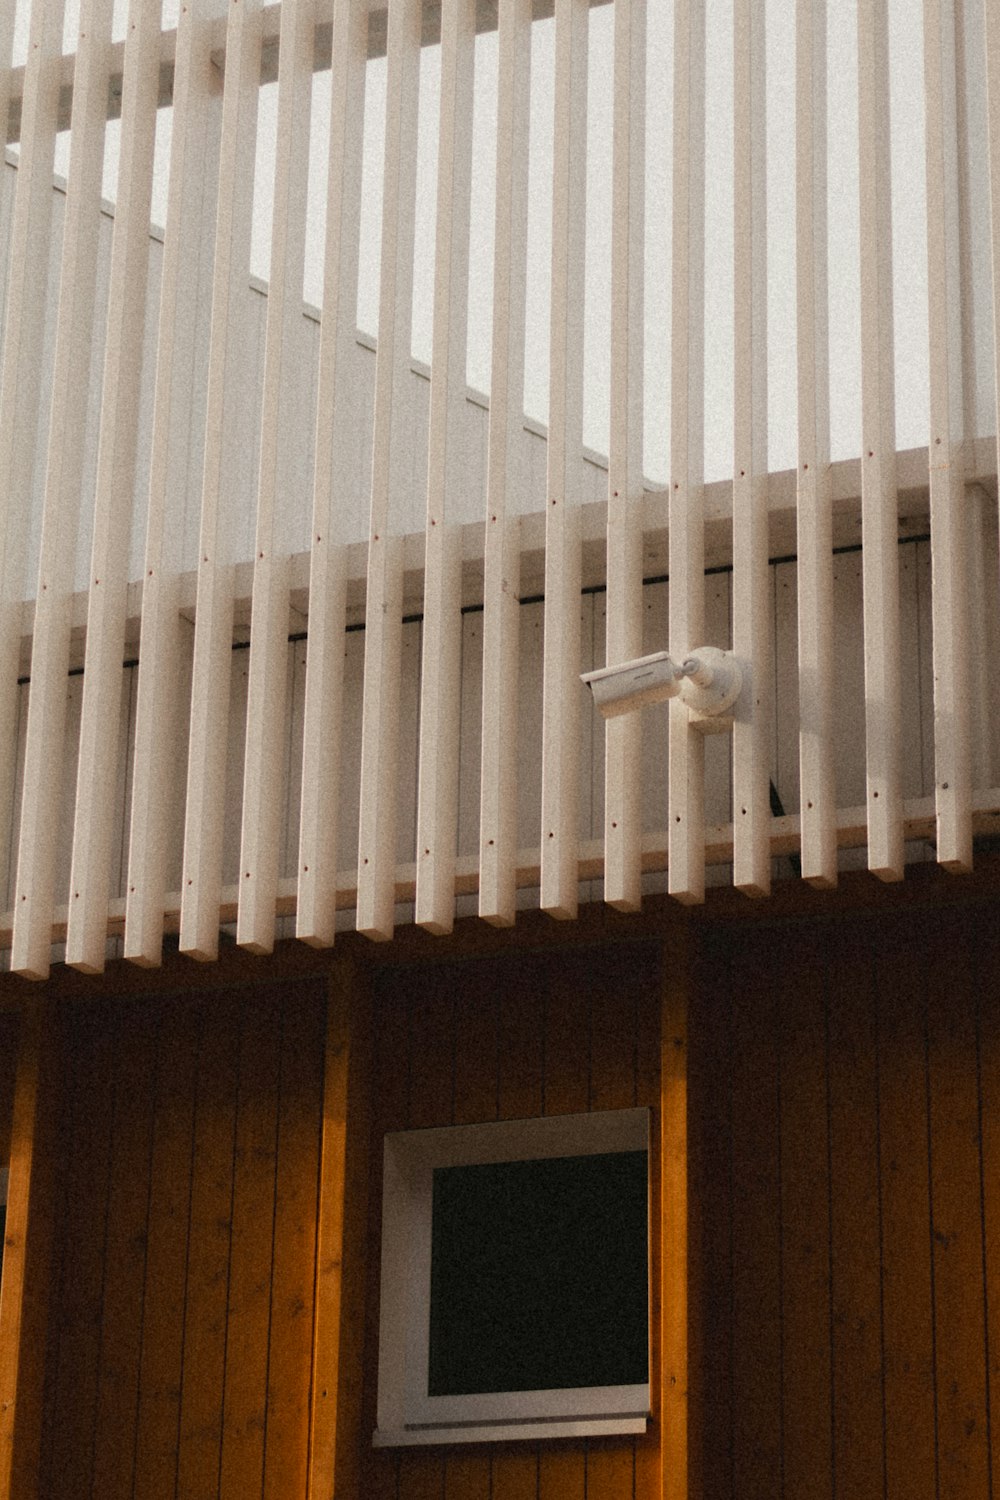 a security camera mounted on the side of a building